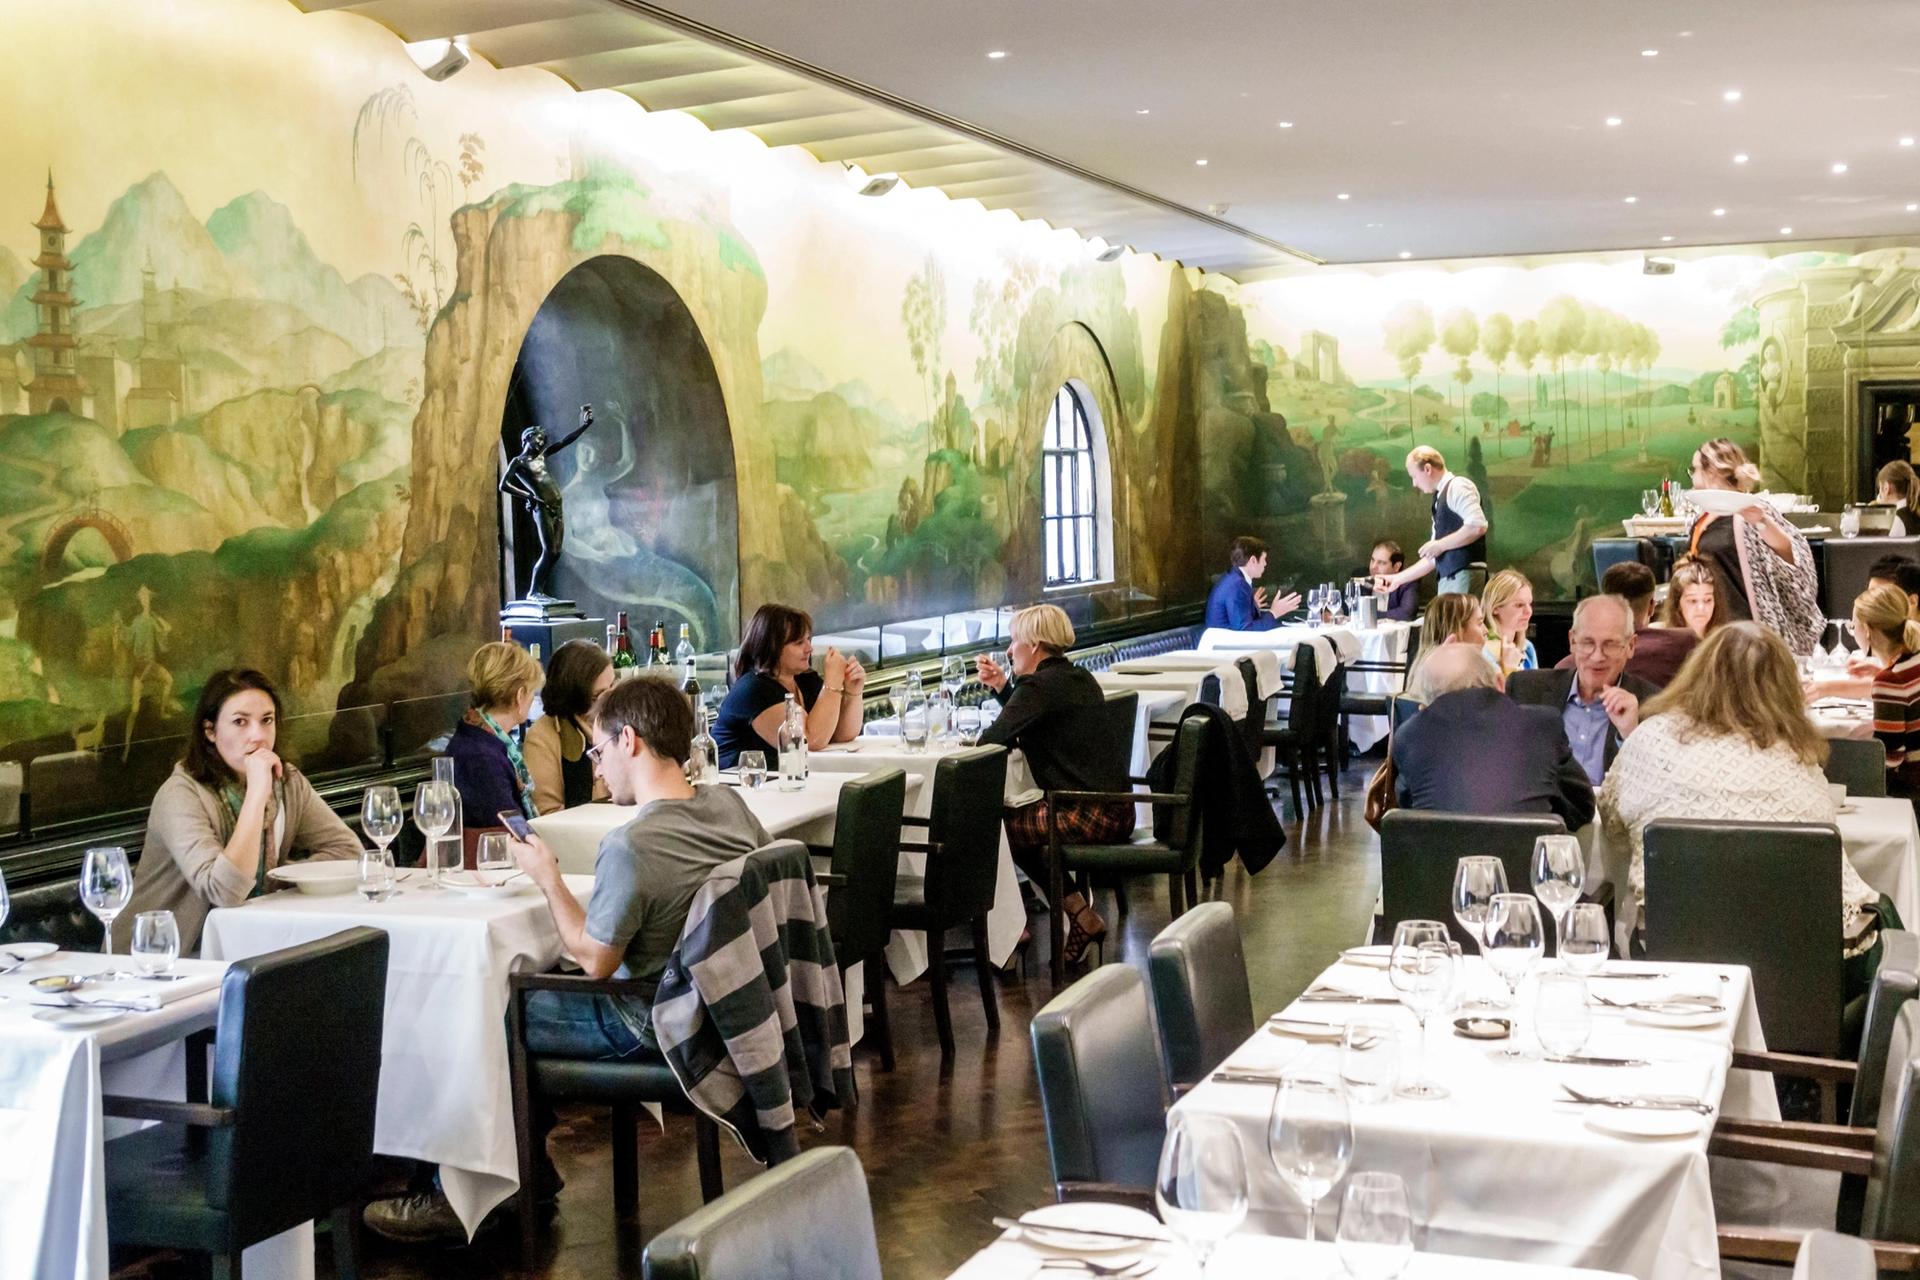 Rex Whistler’s mural The Expedition in Pursuit of Rare Meats (1927) was painted for Tate Britain's restaurant © Jeffrey Isaac Greenberg 9+ / Alamy Stock Photo